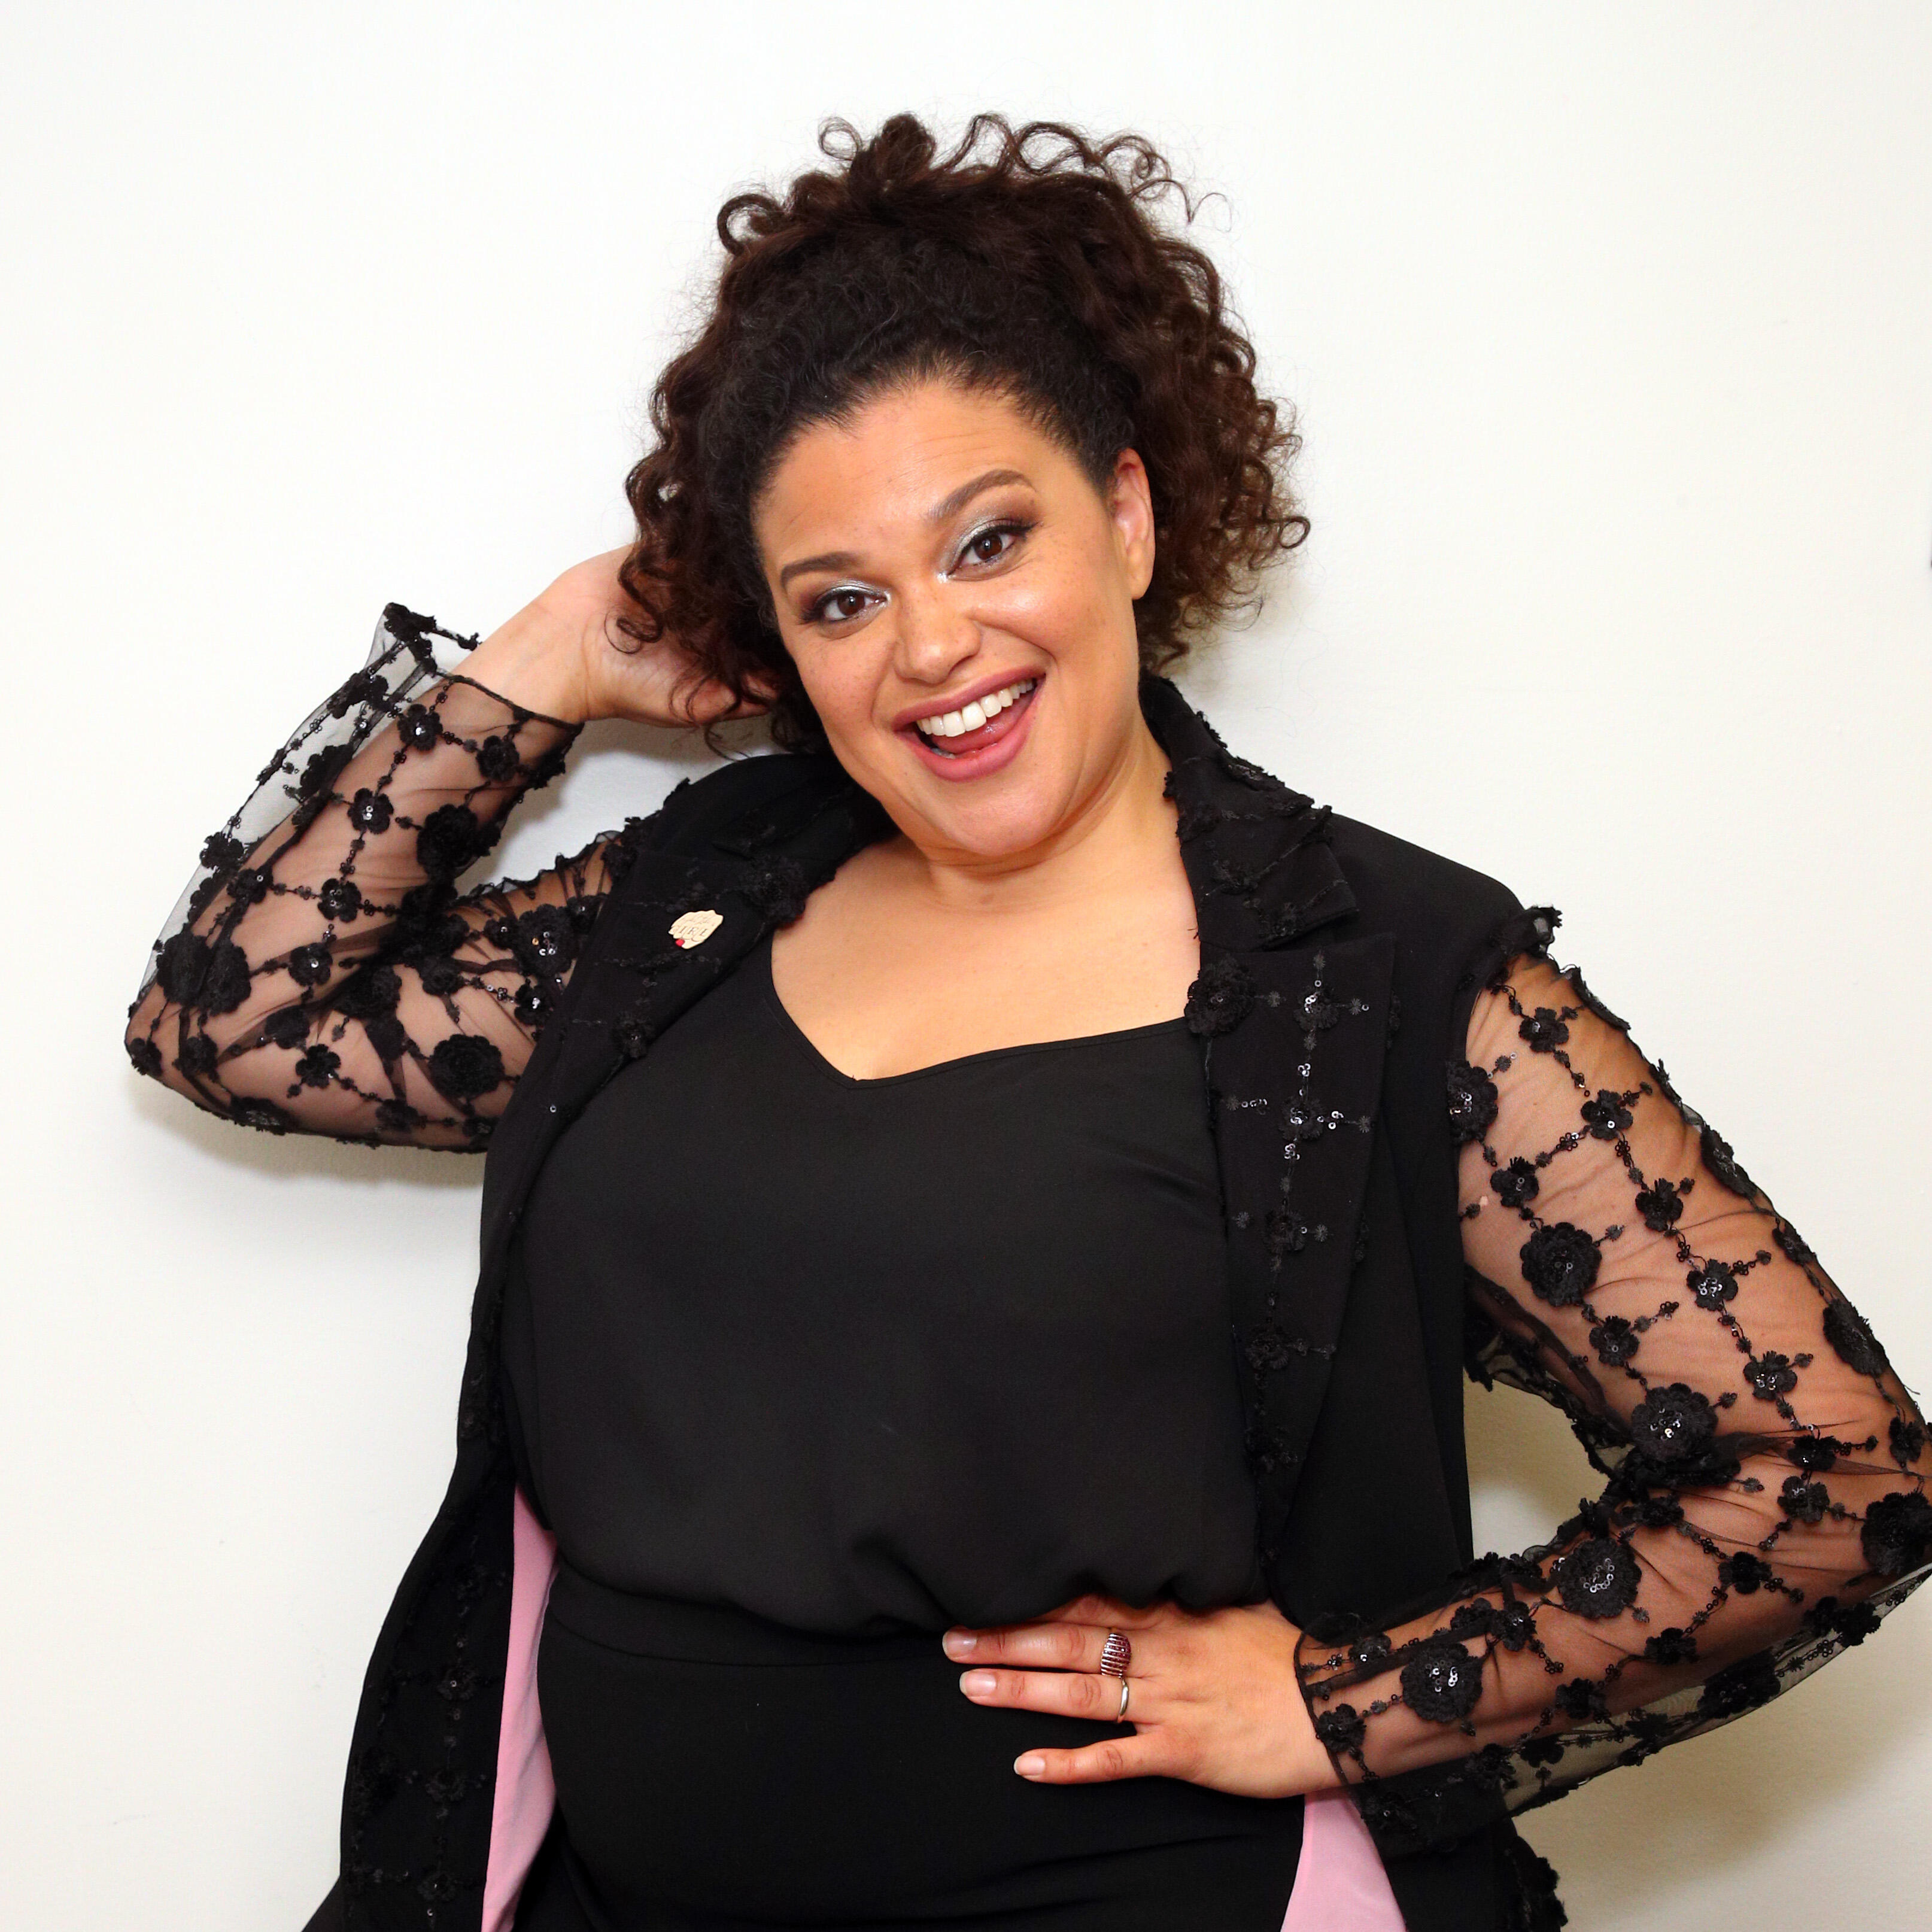 Michelle Buteau is Black, Plus-Size and Newly Single in First Look